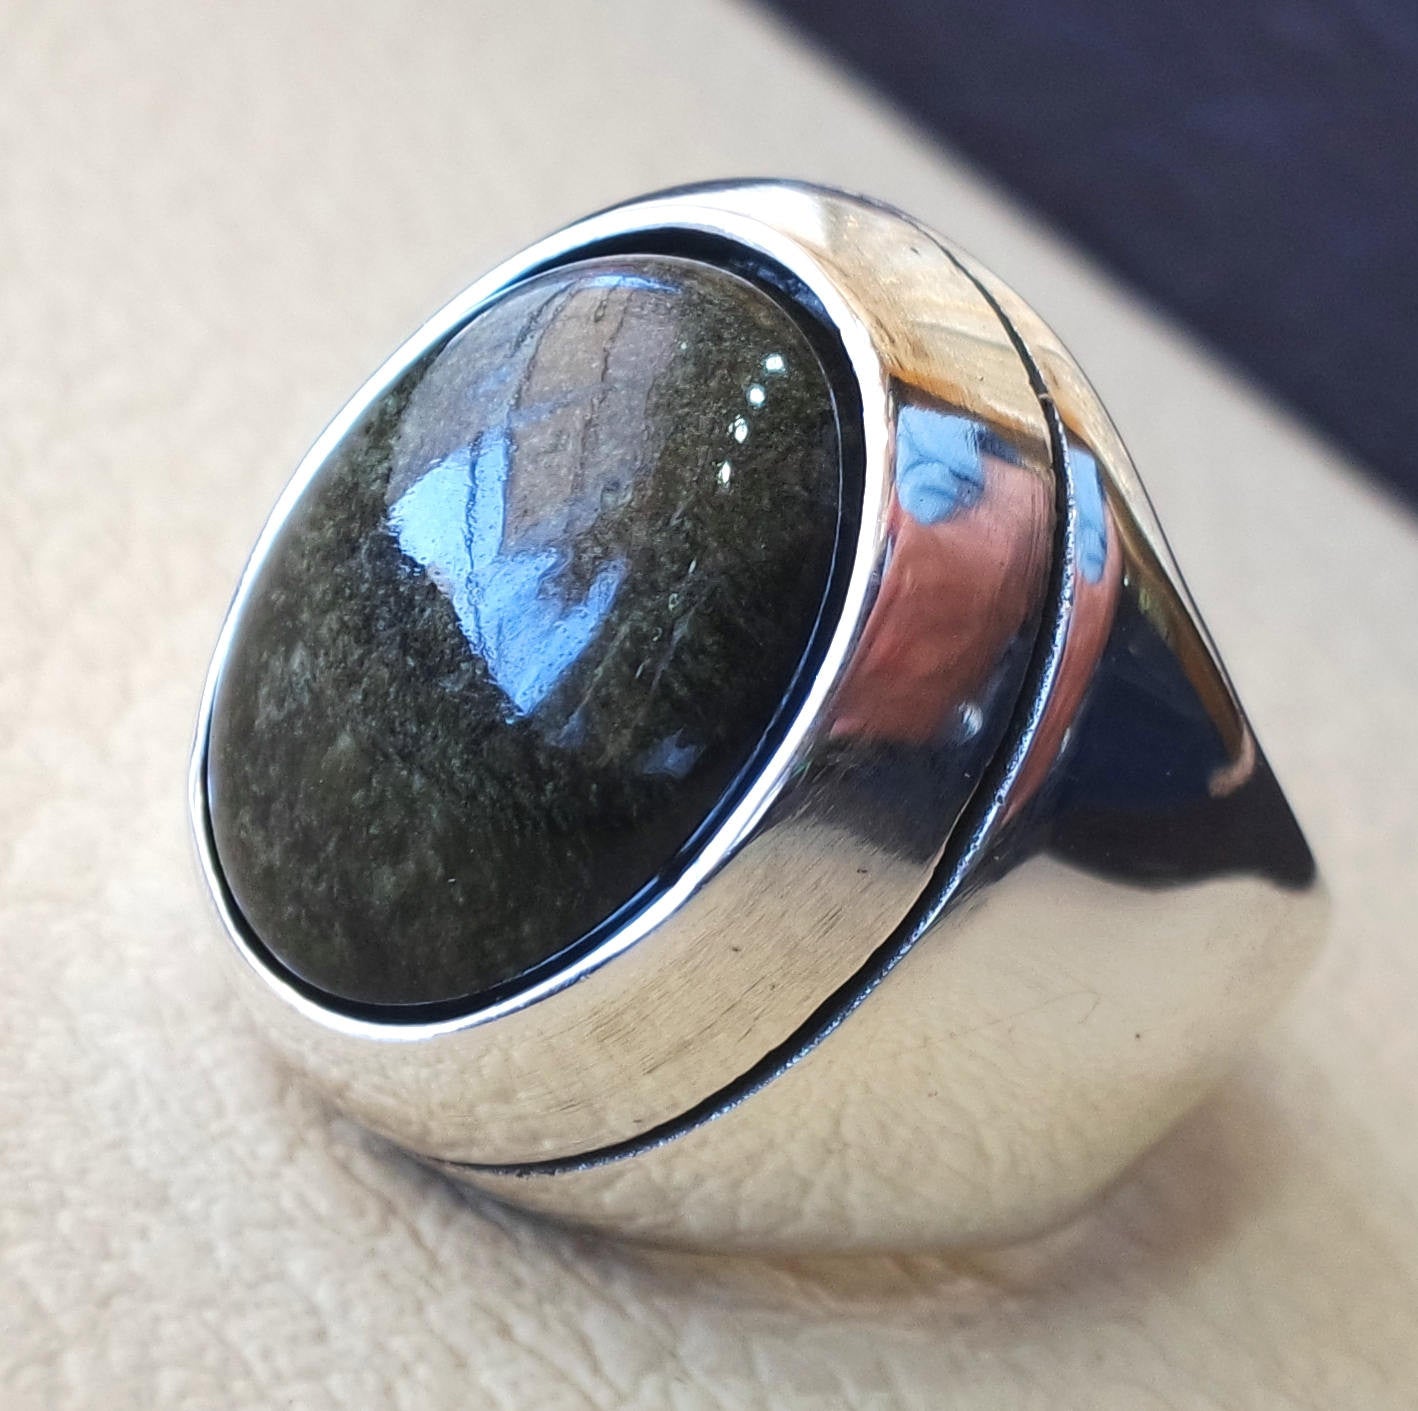 Gold sheen obsidian black aqeeq heavy men ring natural stone sterling silver 925 vintage turkish style all sizes  fast shipping